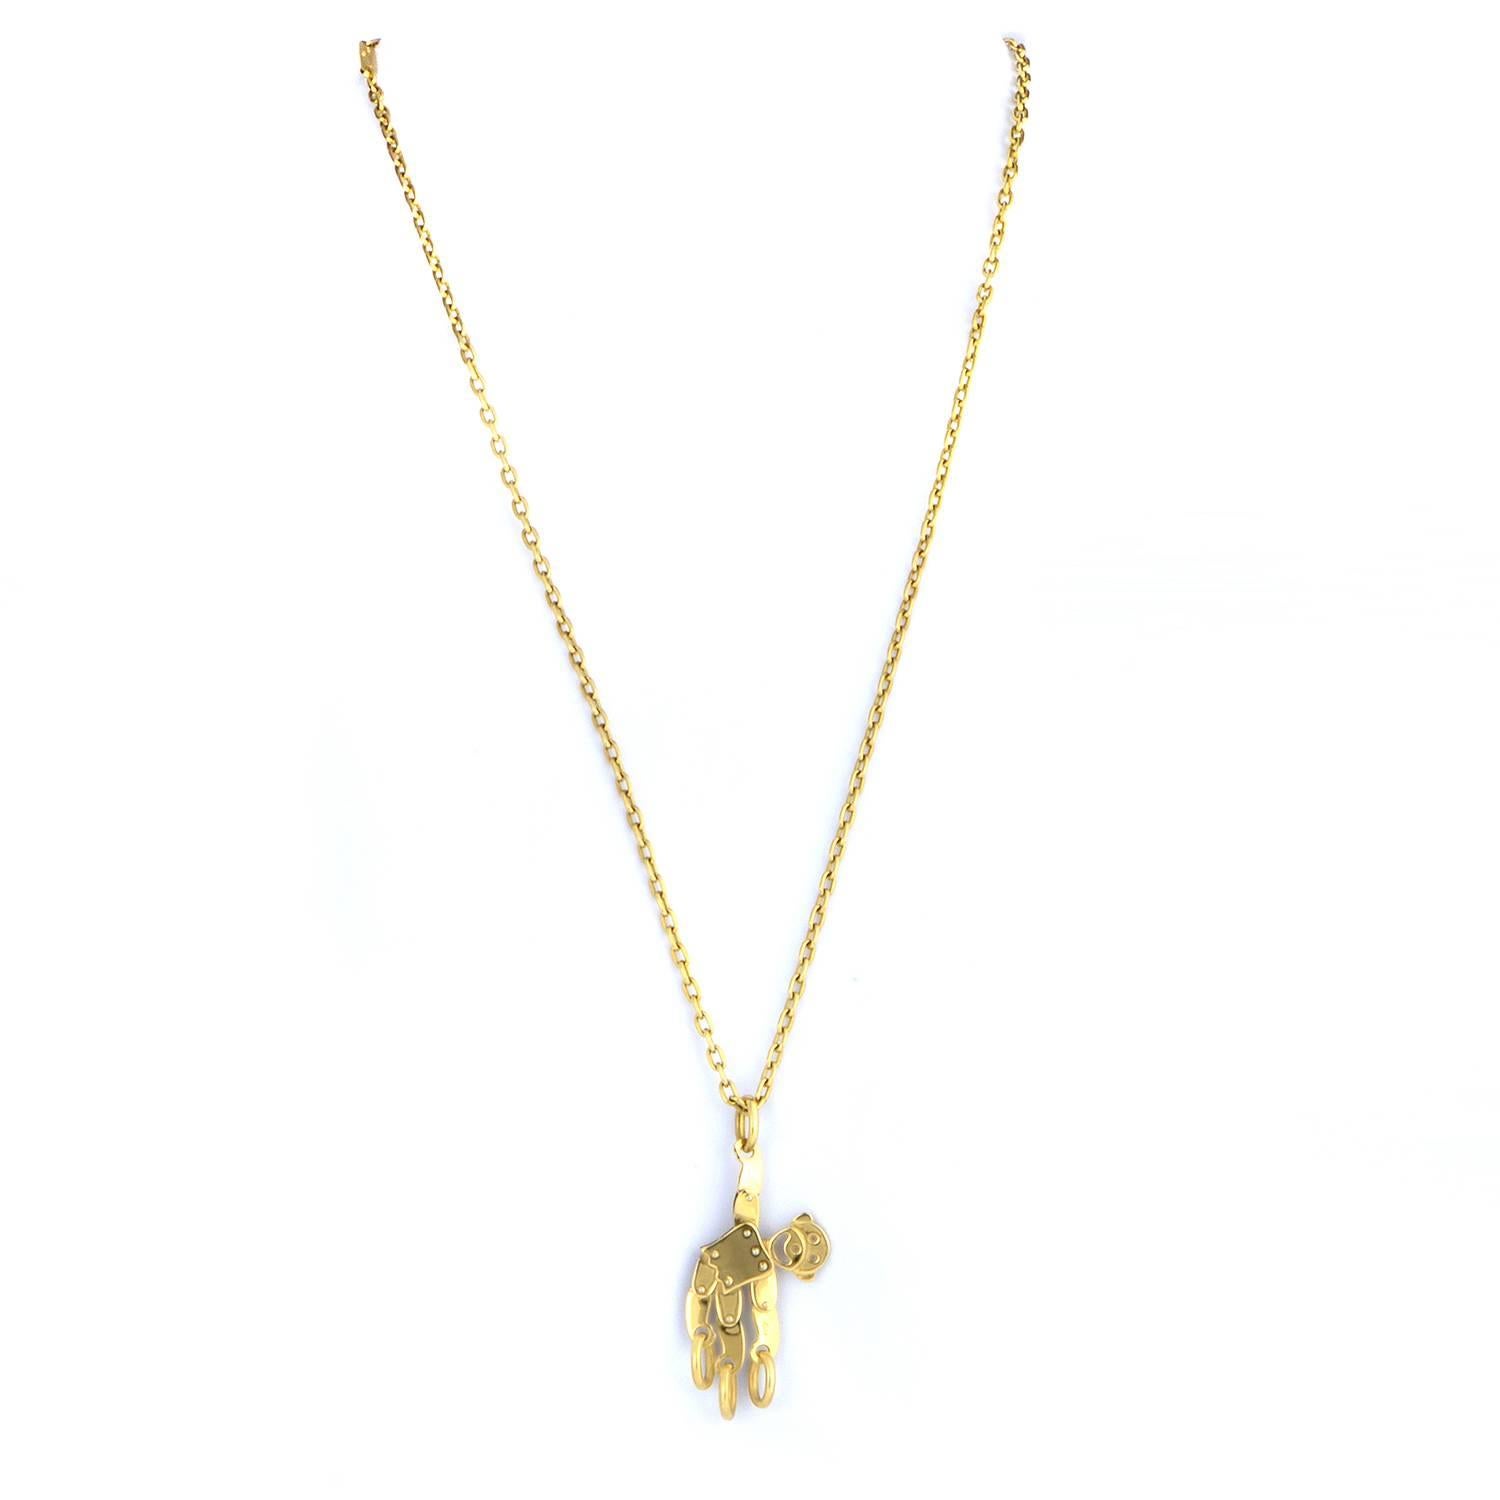 Featuring an elegantly slim chain and an adorably offbeat pendant in the form of a monkey, this splendid necklace from Pomellato is a lovely item that employs luxurious 18K yellow gold radiance for an enchanting allure.
Included Items: